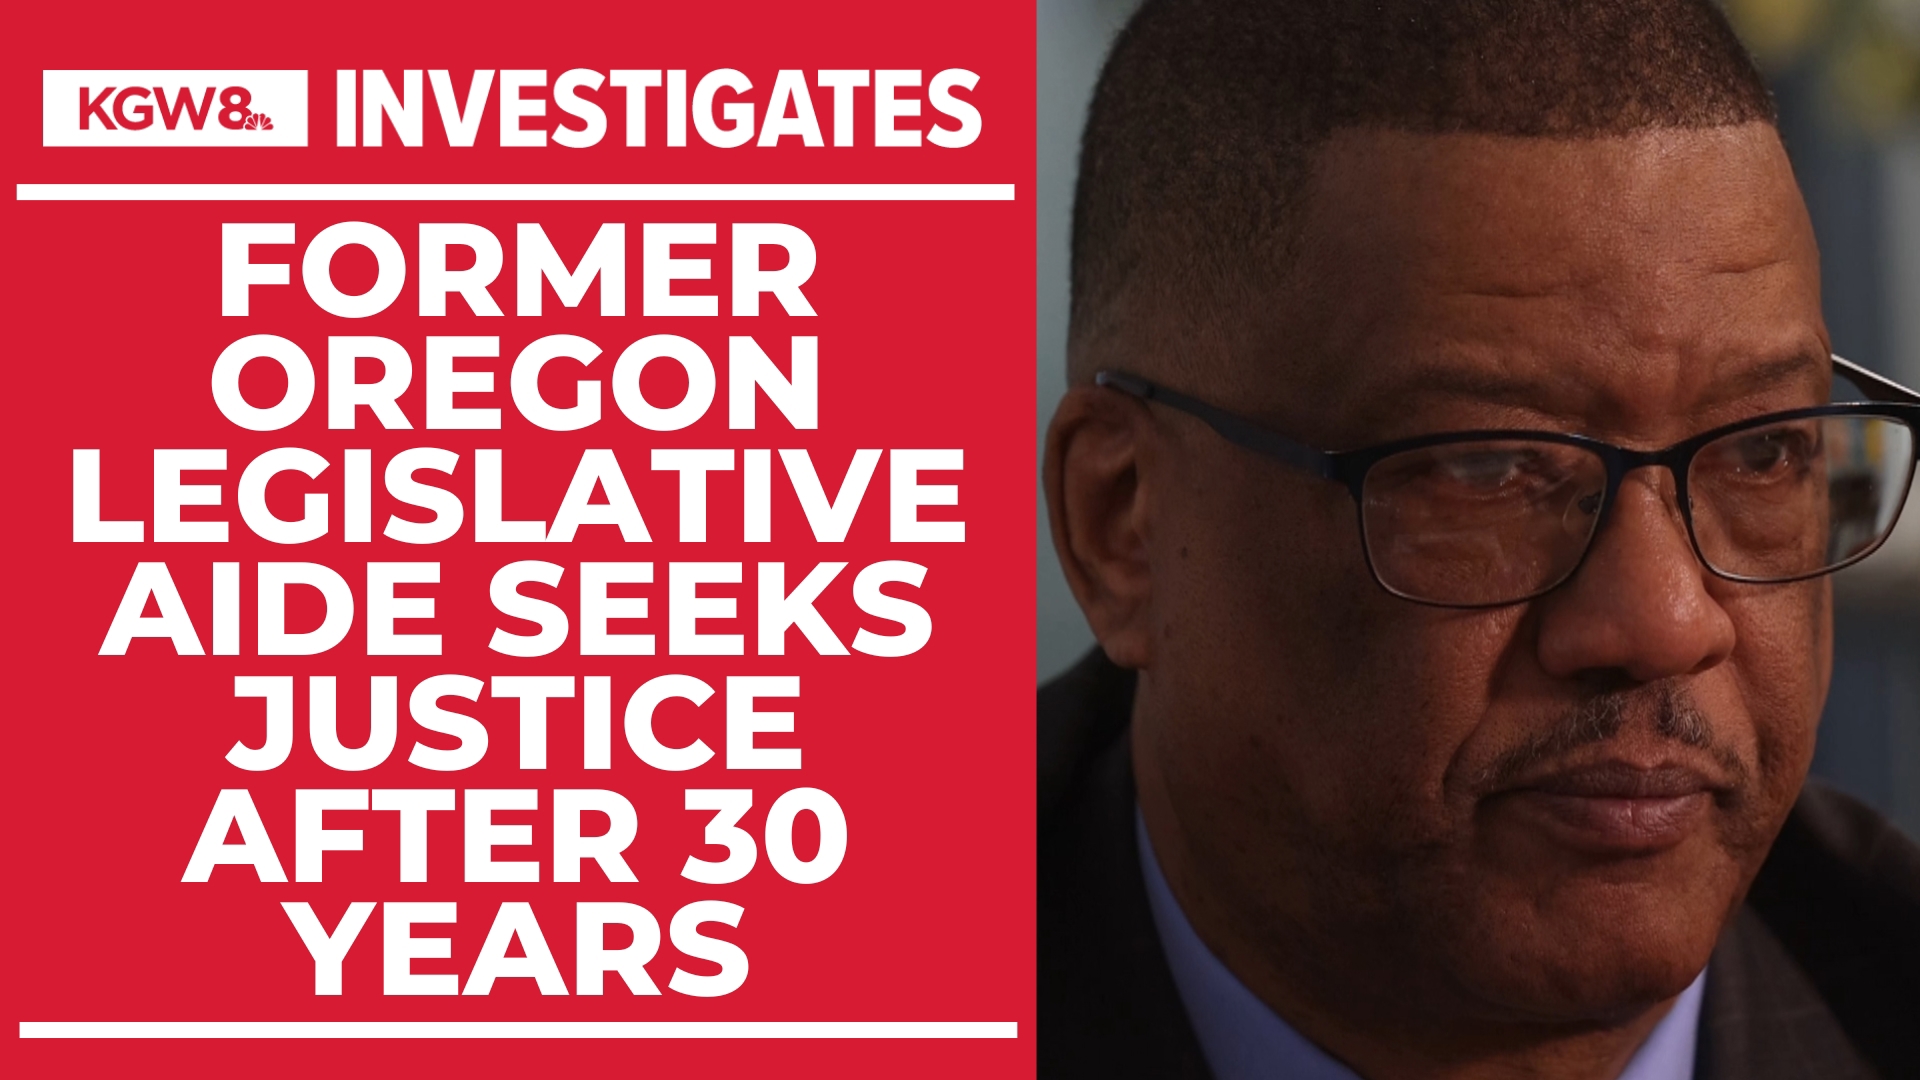 In June 2021, the Oregon Legislature took a rare step and apologized to Robert Parker. His lawsuits against the state still haven't been settled.